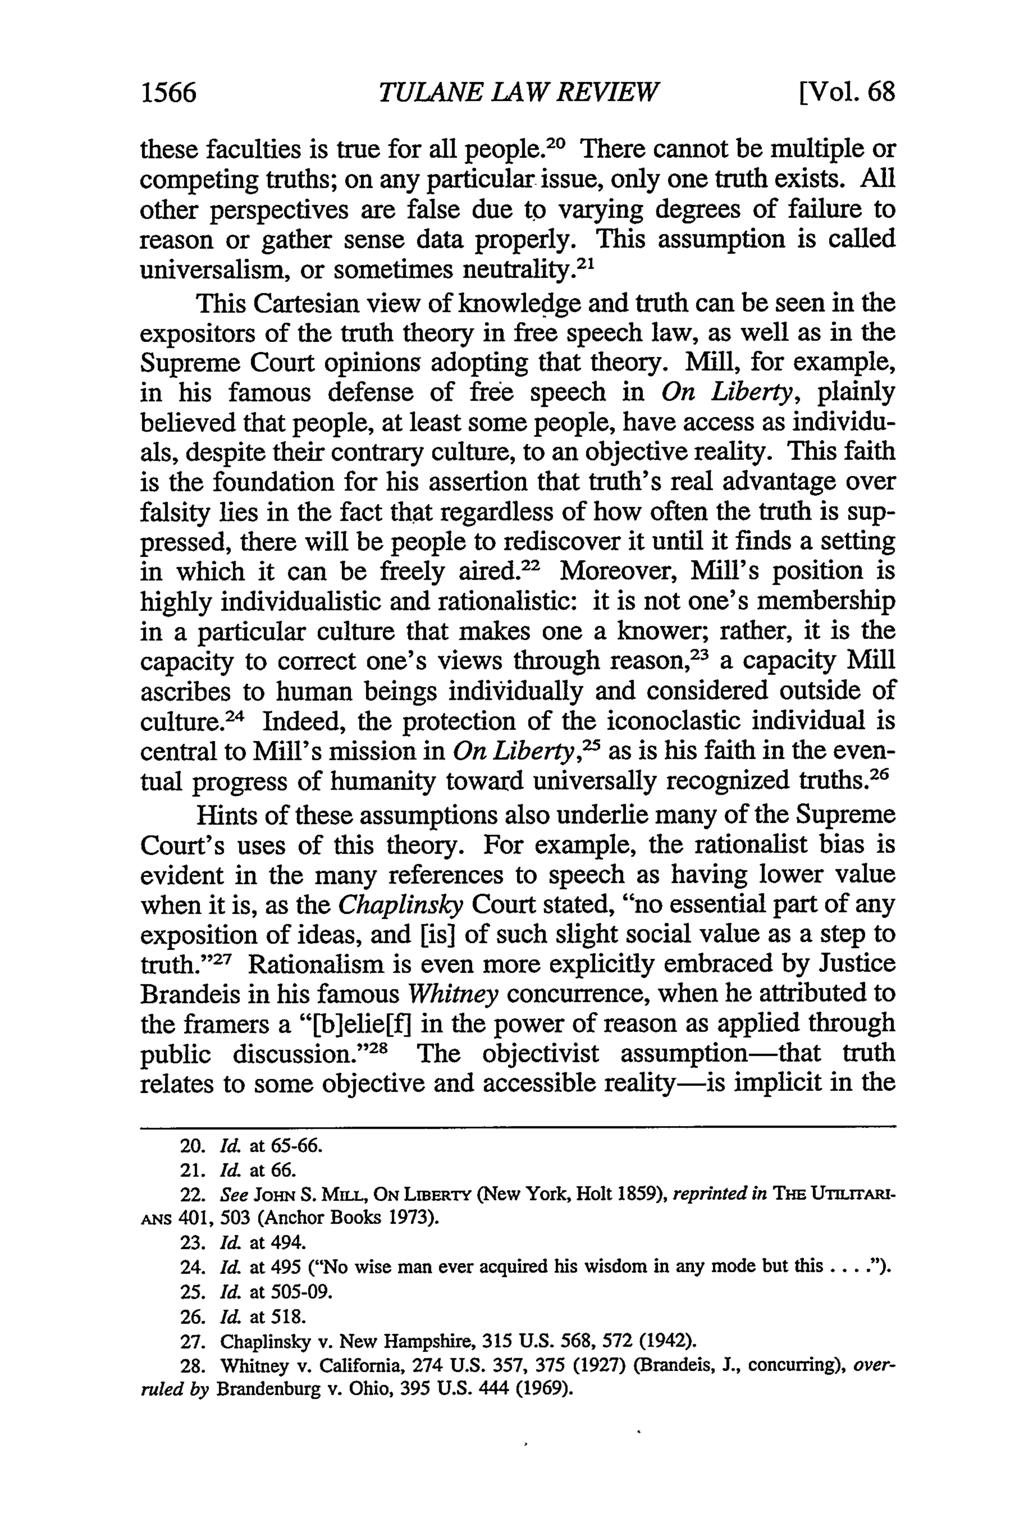 1566 TULANE LAW REVIEW [Vol. 68 these faculties is true for all people. 20 There cannot be multiple or competing truths; on any particular issue, only one truth exists.